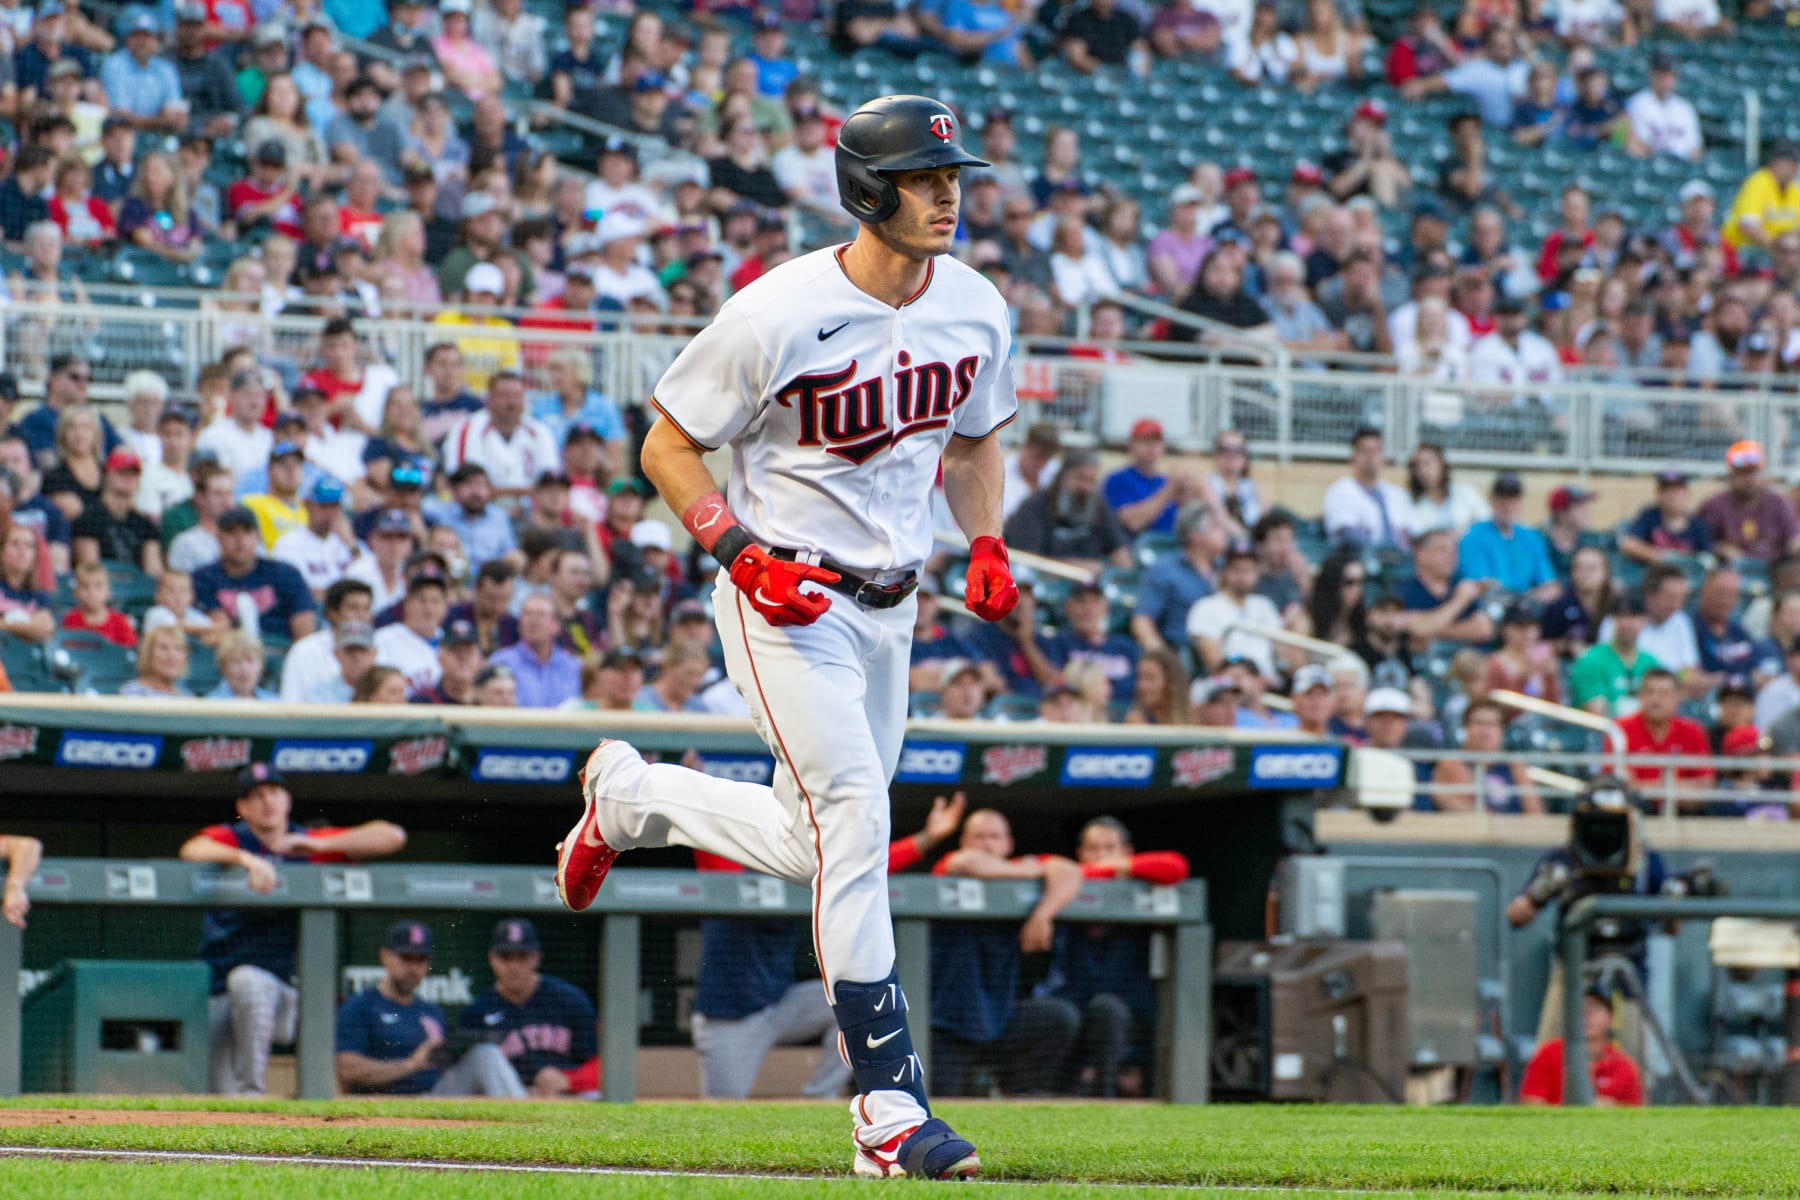 Stay in the present': Max Kepler, Twins gearing up for 60-game MLB season